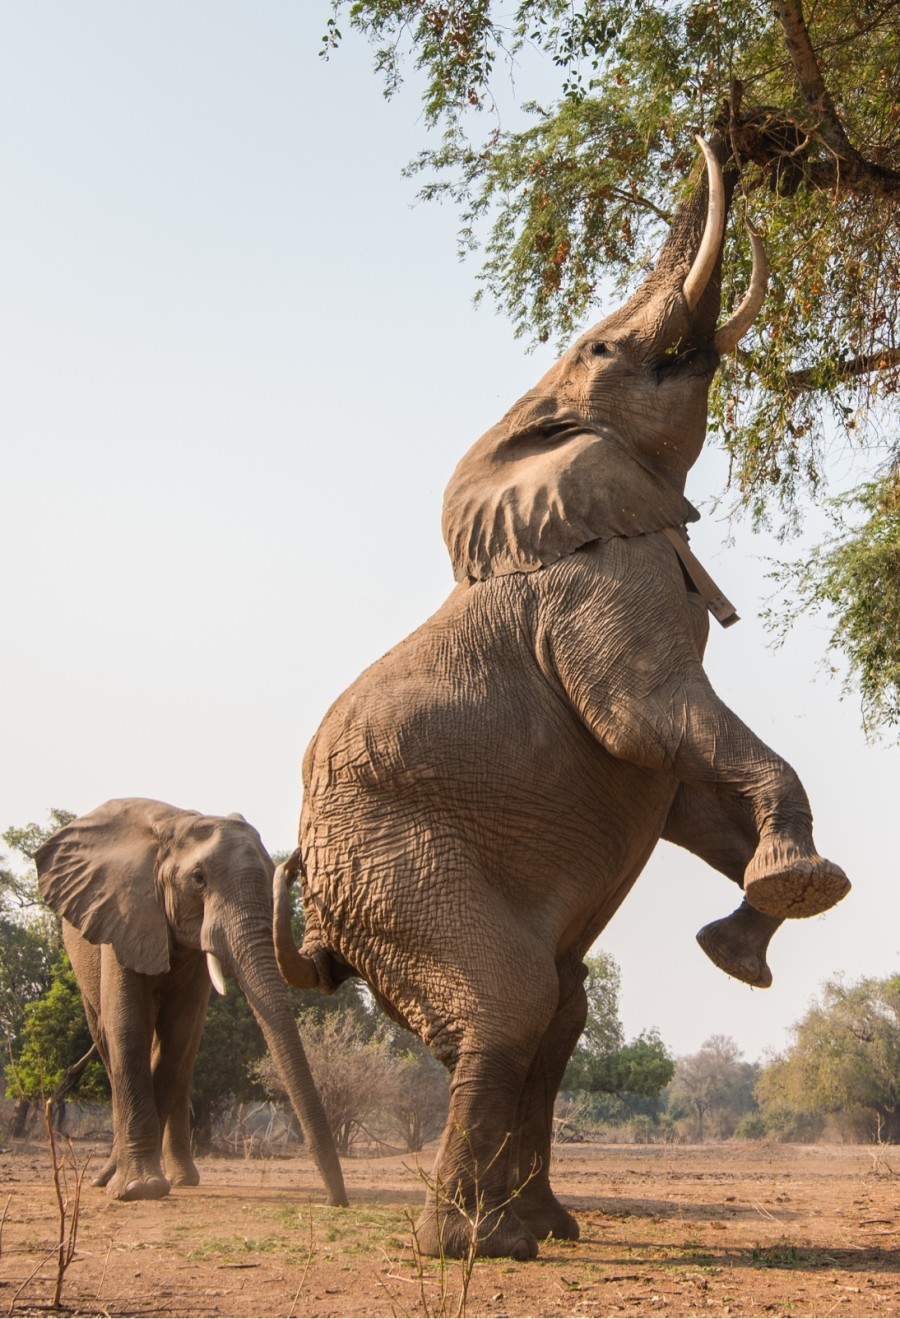 Elephant on Back Legs Reaching for Tree with Trunk as Another Elephant Approaches